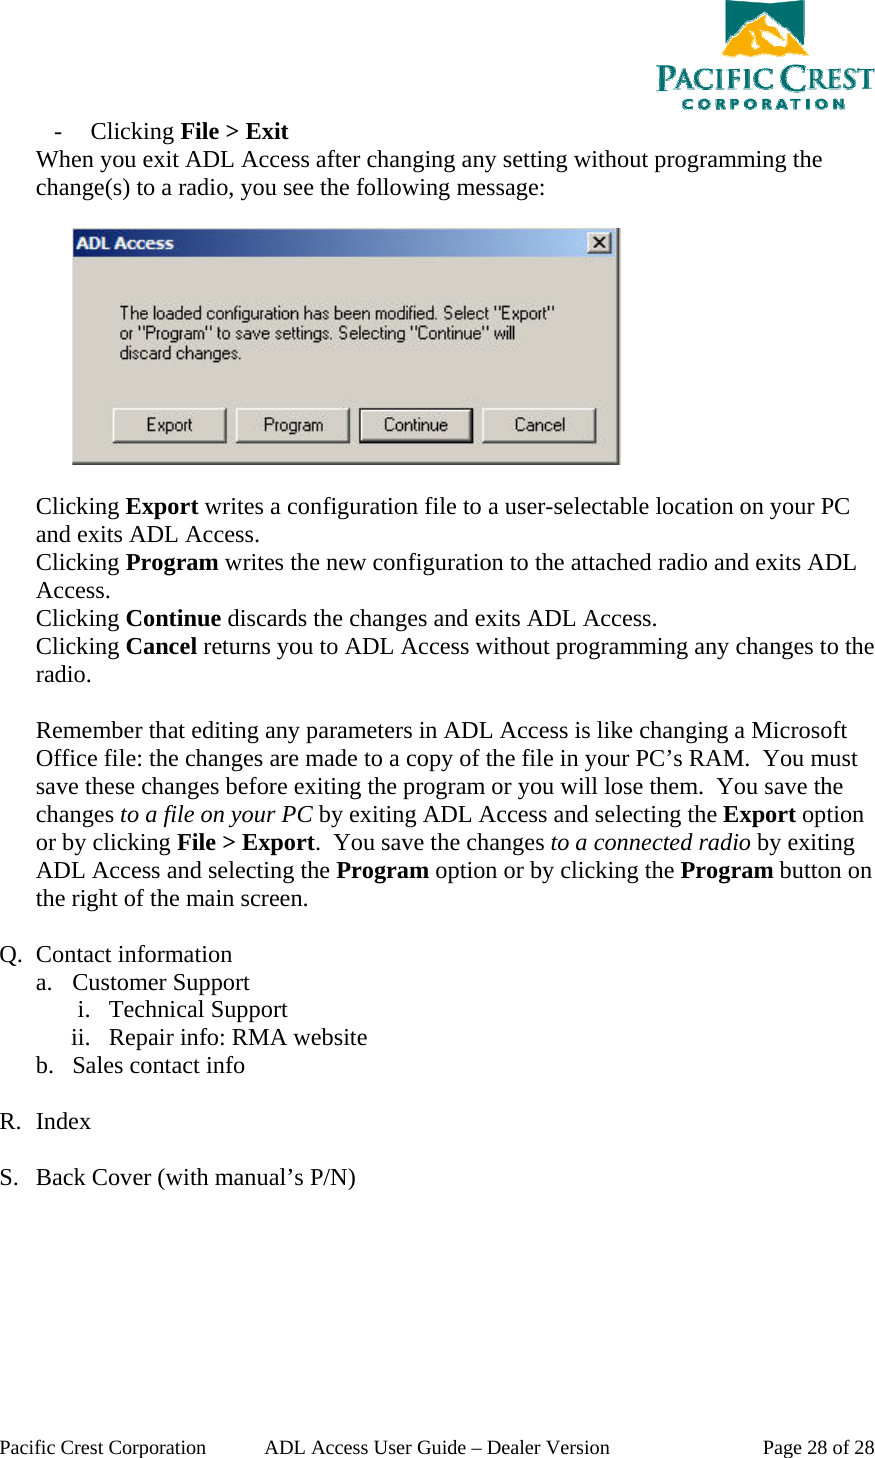  Pacific Crest Corporation  ADL Access User Guide – Dealer Version  Page 28 of 28 - Clicking File &gt; Exit When you exit ADL Access after changing any setting without programming the change(s) to a radio, you see the following message:     Clicking Export writes a configuration file to a user-selectable location on your PC and exits ADL Access. Clicking Program writes the new configuration to the attached radio and exits ADL Access. Clicking Continue discards the changes and exits ADL Access. Clicking Cancel returns you to ADL Access without programming any changes to the radio.  Remember that editing any parameters in ADL Access is like changing a Microsoft Office file: the changes are made to a copy of the file in your PC’s RAM.  You must save these changes before exiting the program or you will lose them.  You save the changes to a file on your PC by exiting ADL Access and selecting the Export option or by clicking File &gt; Export.  You save the changes to a connected radio by exiting ADL Access and selecting the Program option or by clicking the Program button on the right of the main screen.    Q. Contact information a. Customer Support i. Technical Support ii. Repair info: RMA website b. Sales contact info  R. Index  S. Back Cover (with manual’s P/N) 